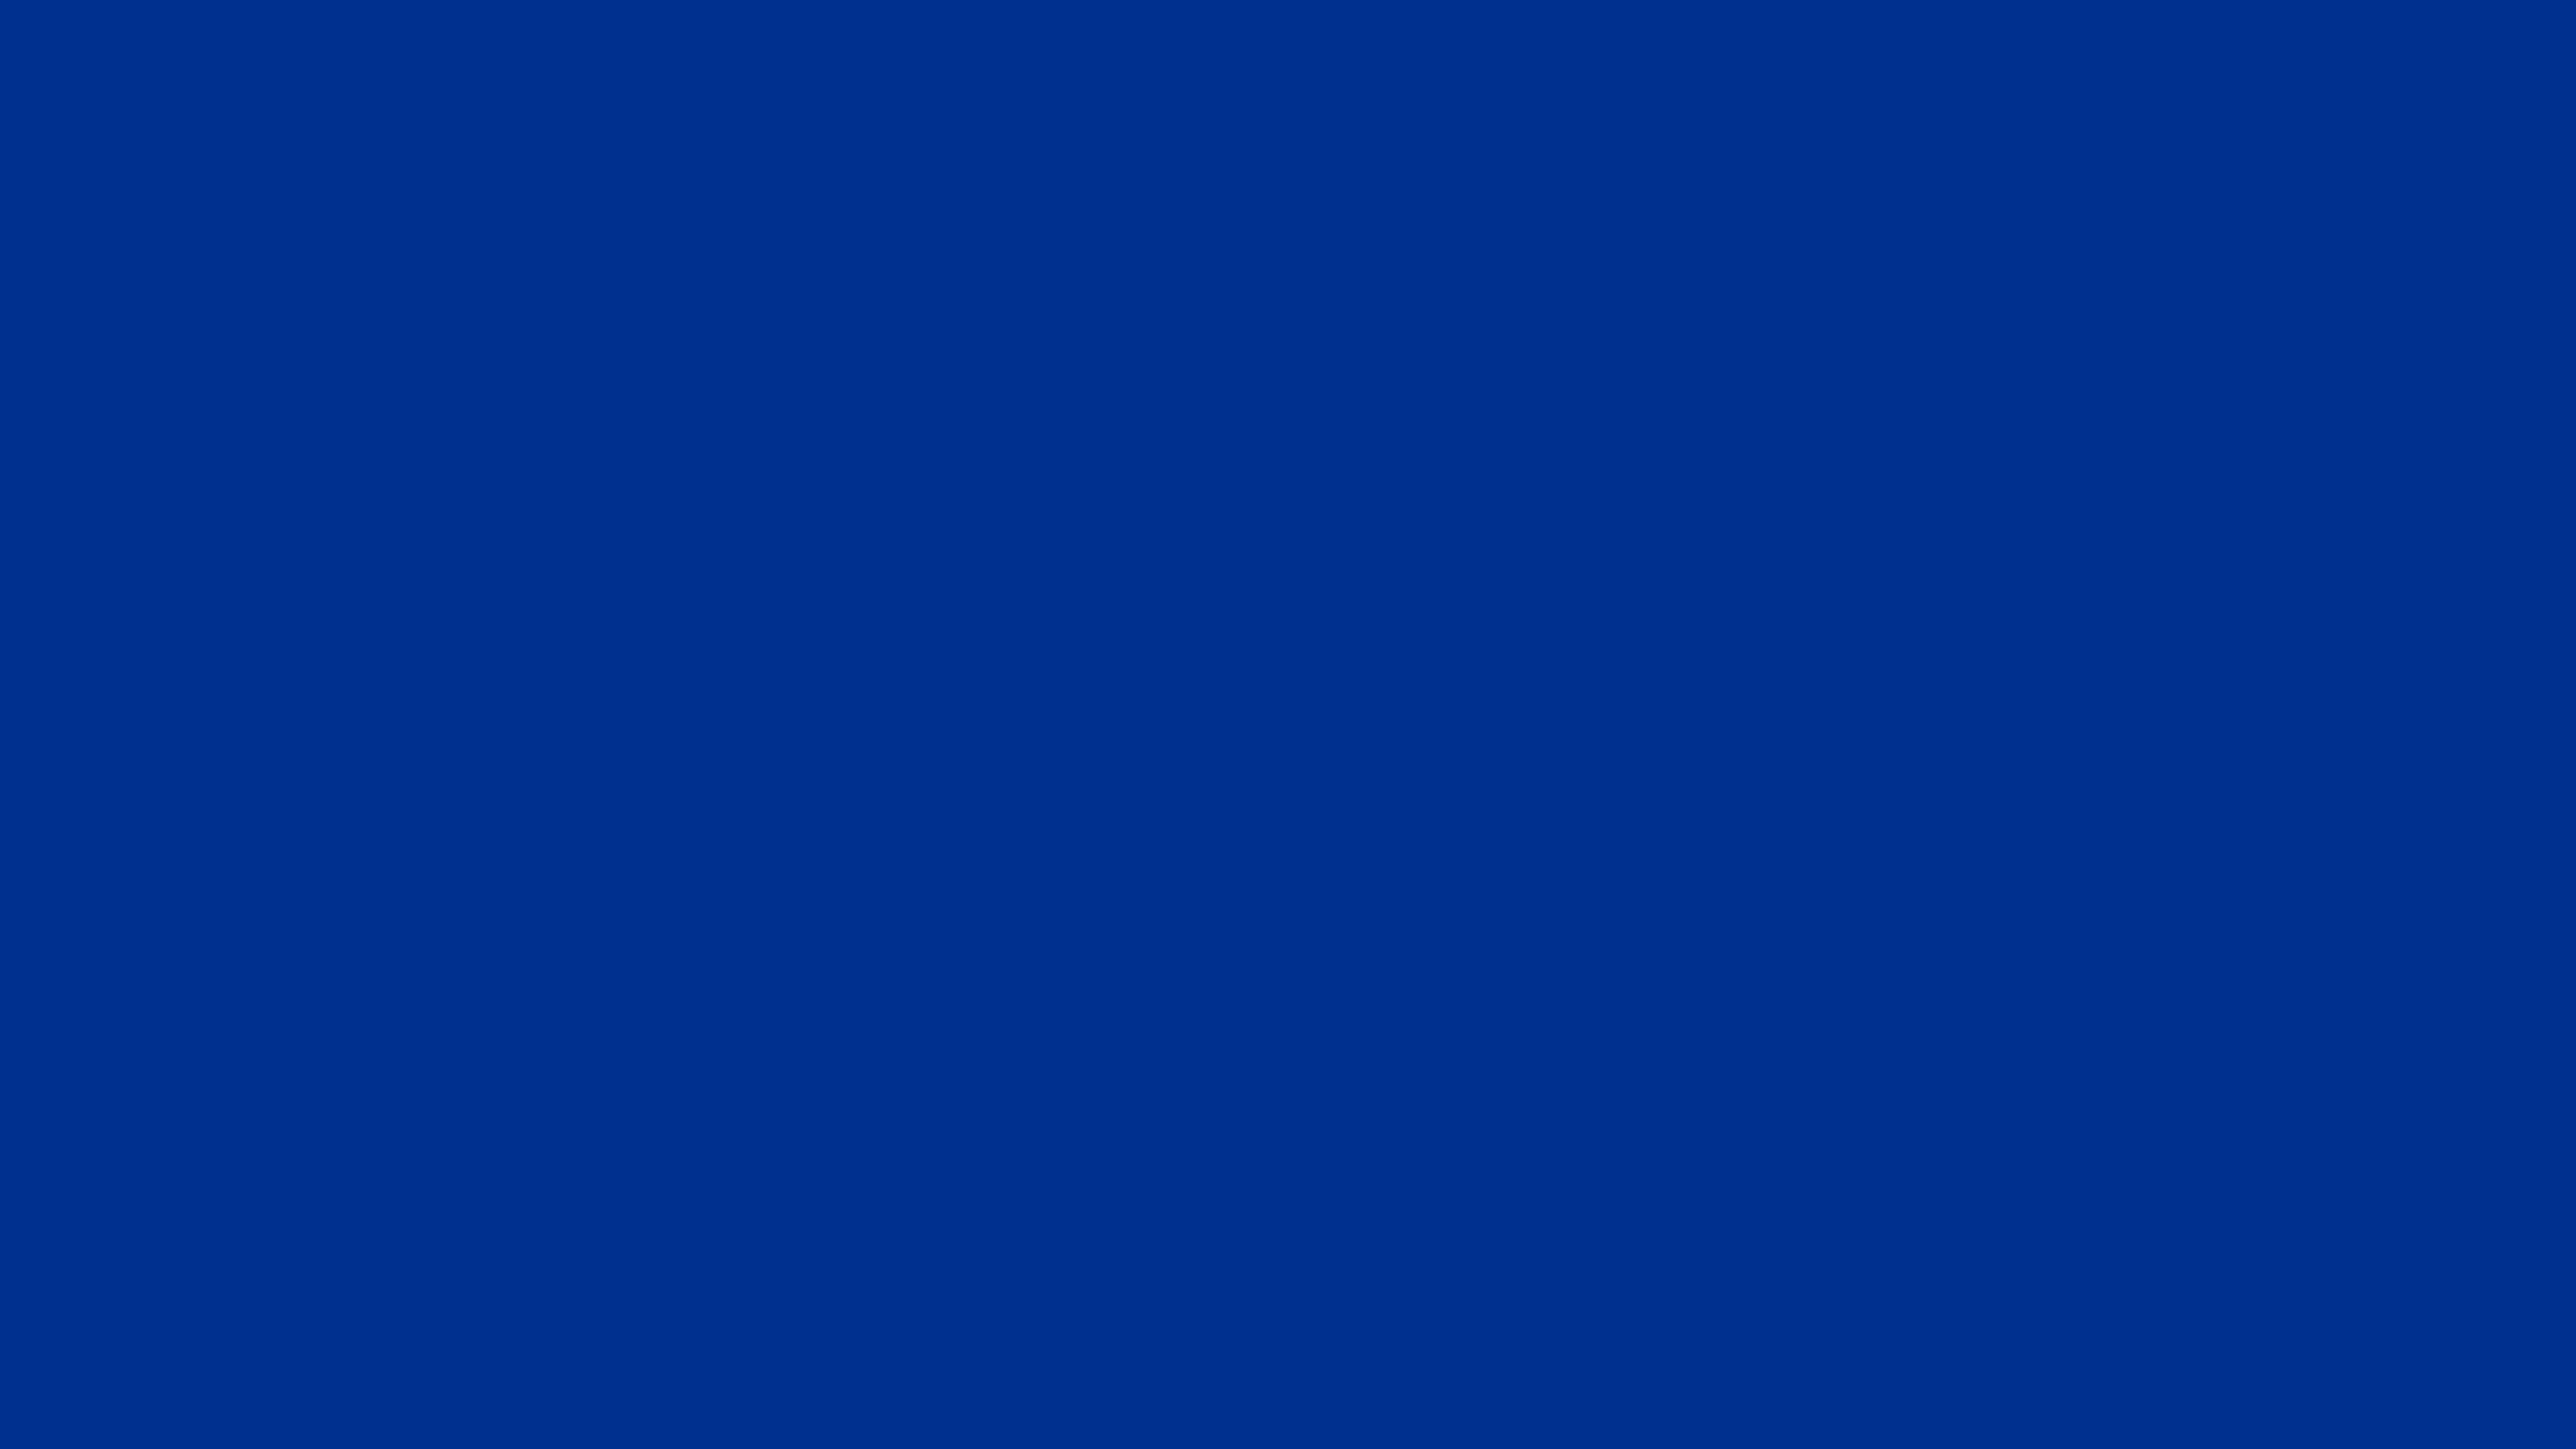 3840x2160 Air Force Dark Blue Solid Color Background